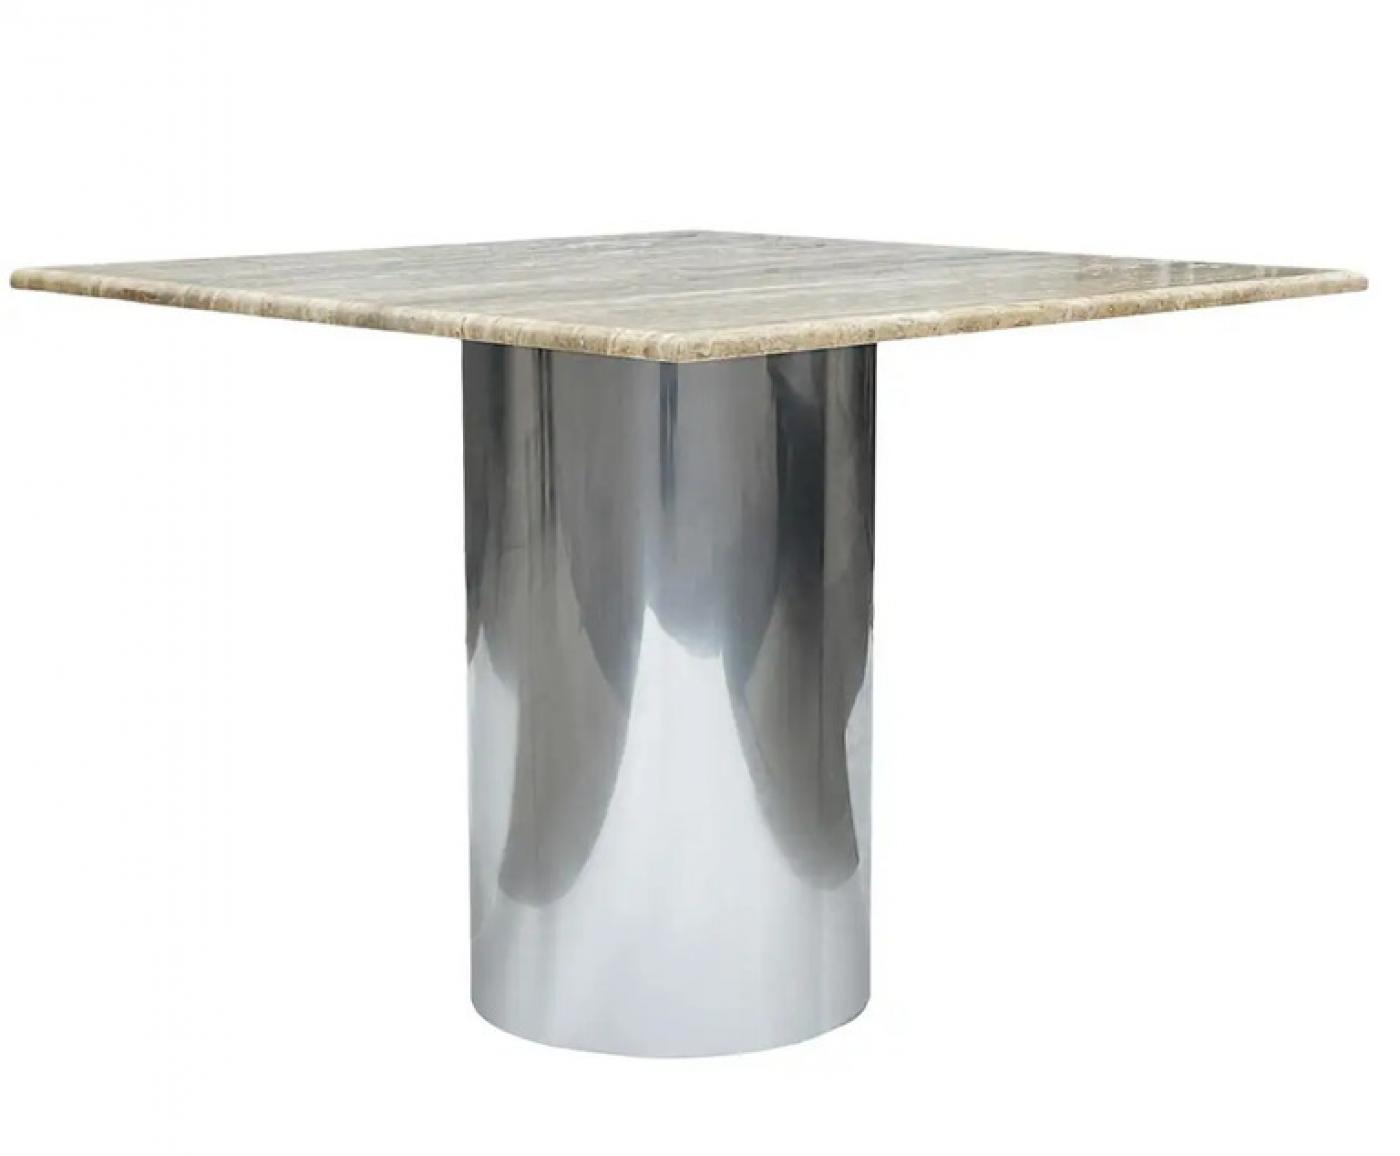 Mid Century Italian Post Modern Travertine Marble Dining Table With Steel Base